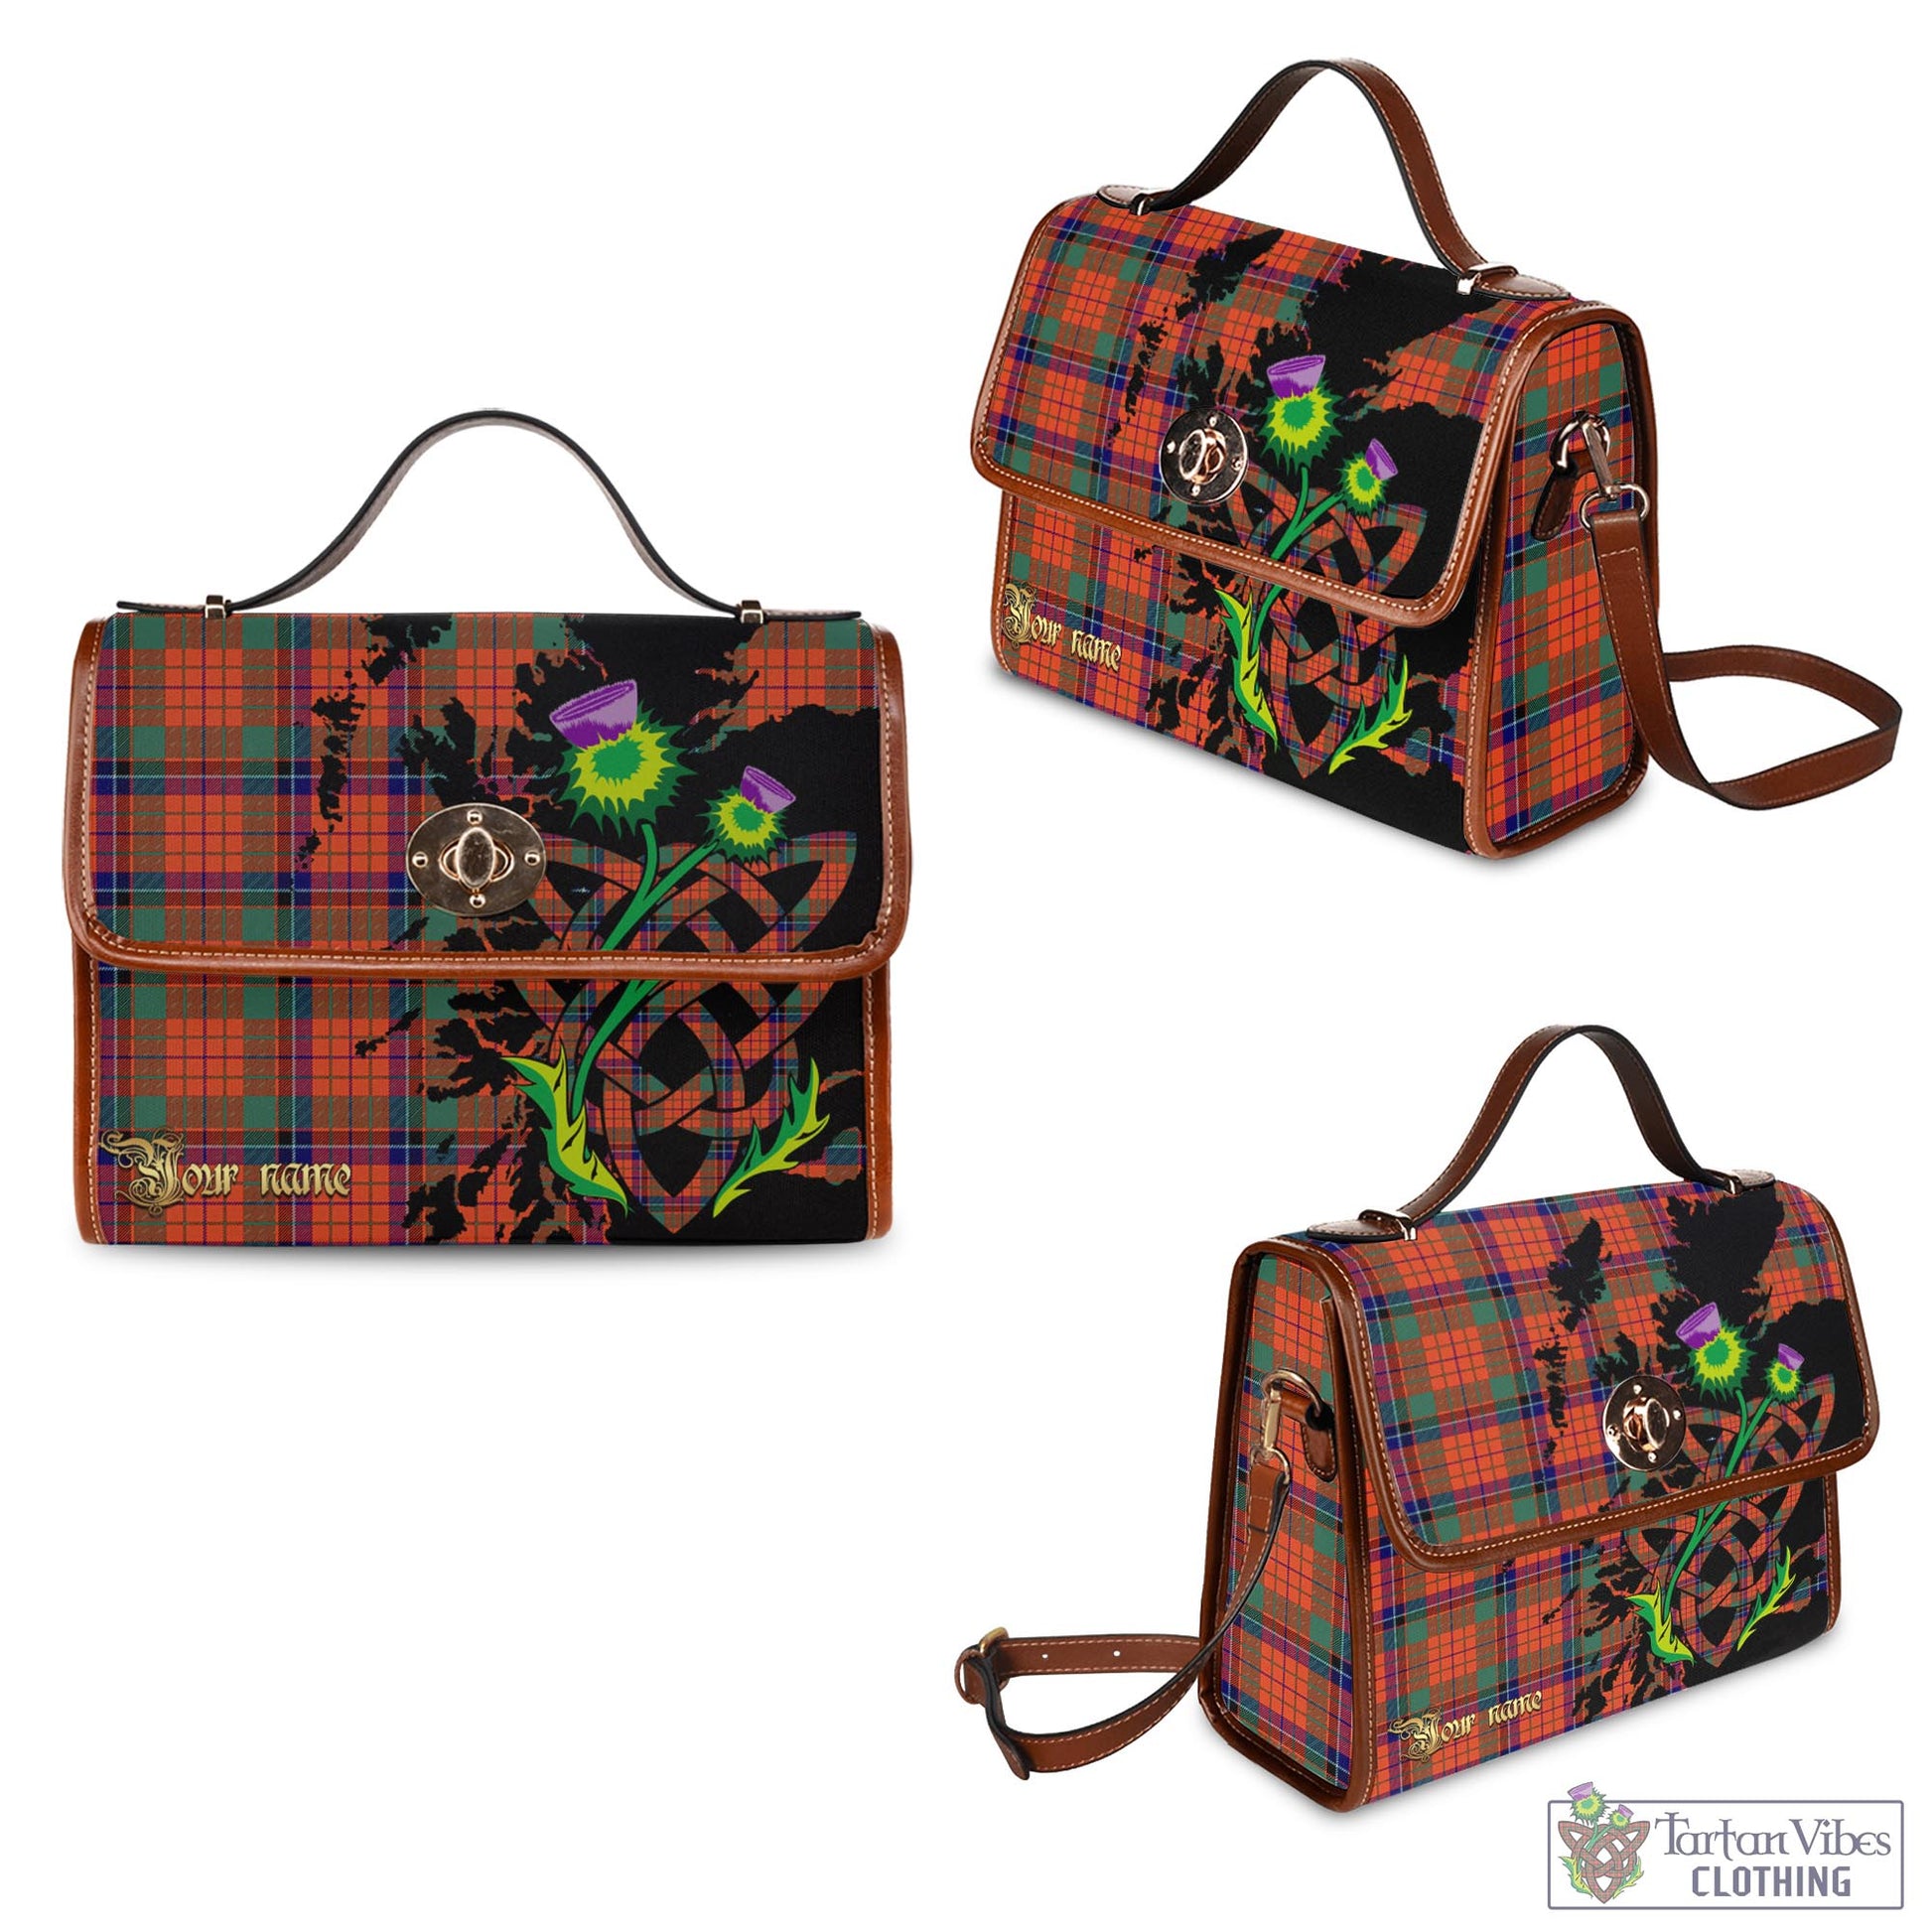 Tartan Vibes Clothing Nicolson Ancient Tartan Waterproof Canvas Bag with Scotland Map and Thistle Celtic Accents